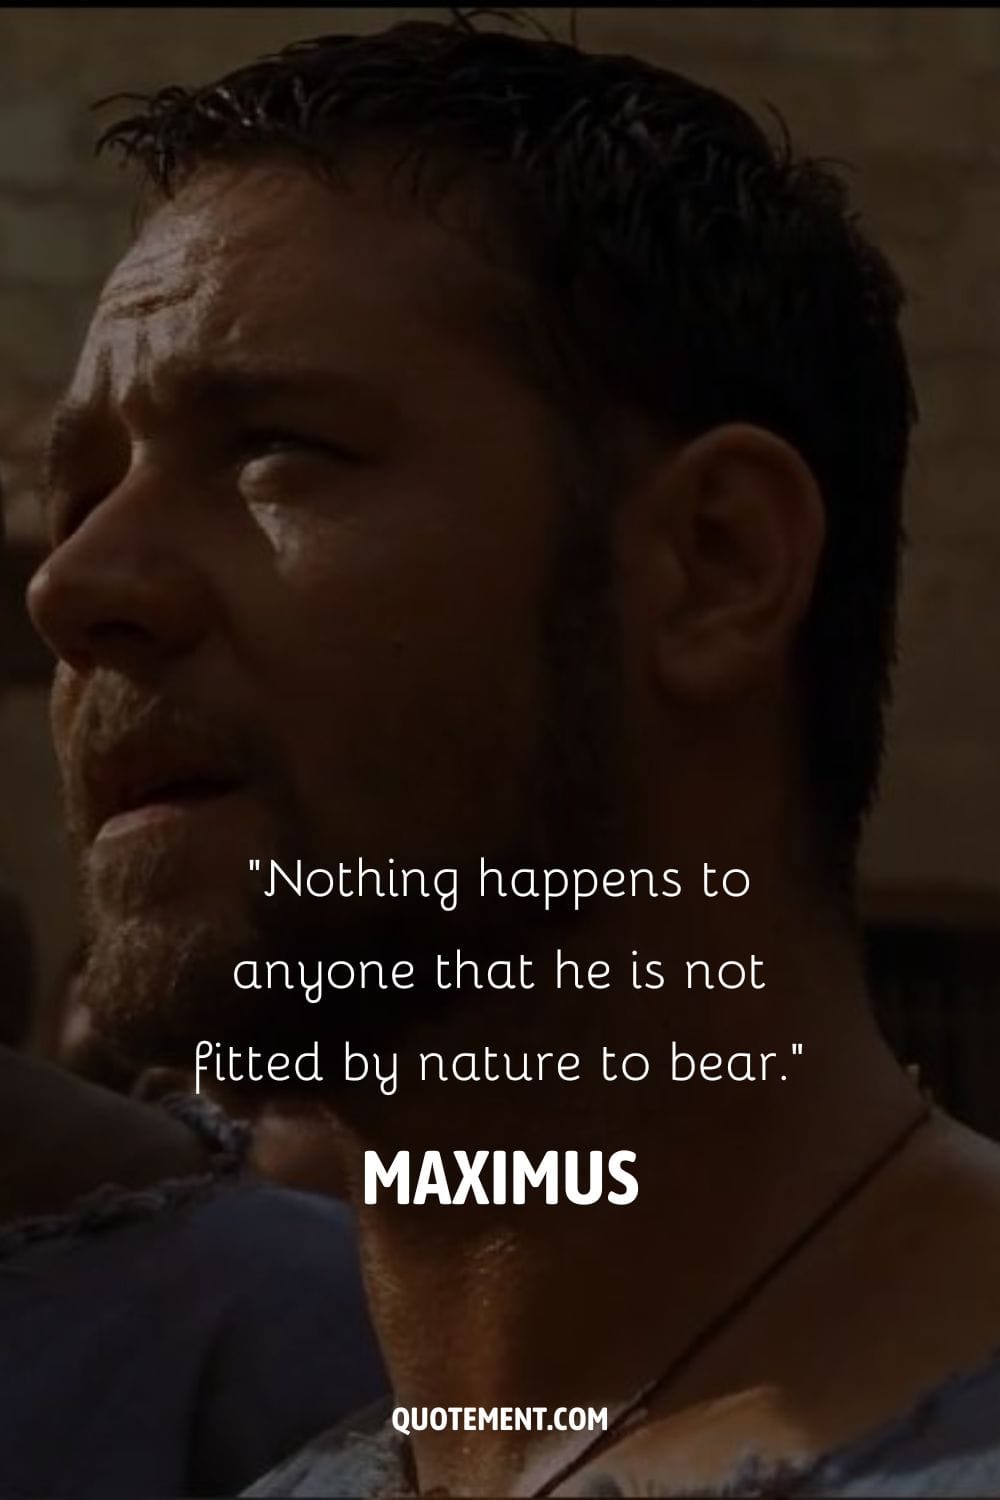 Russell Crowe's unforgettable Gladiator performance.